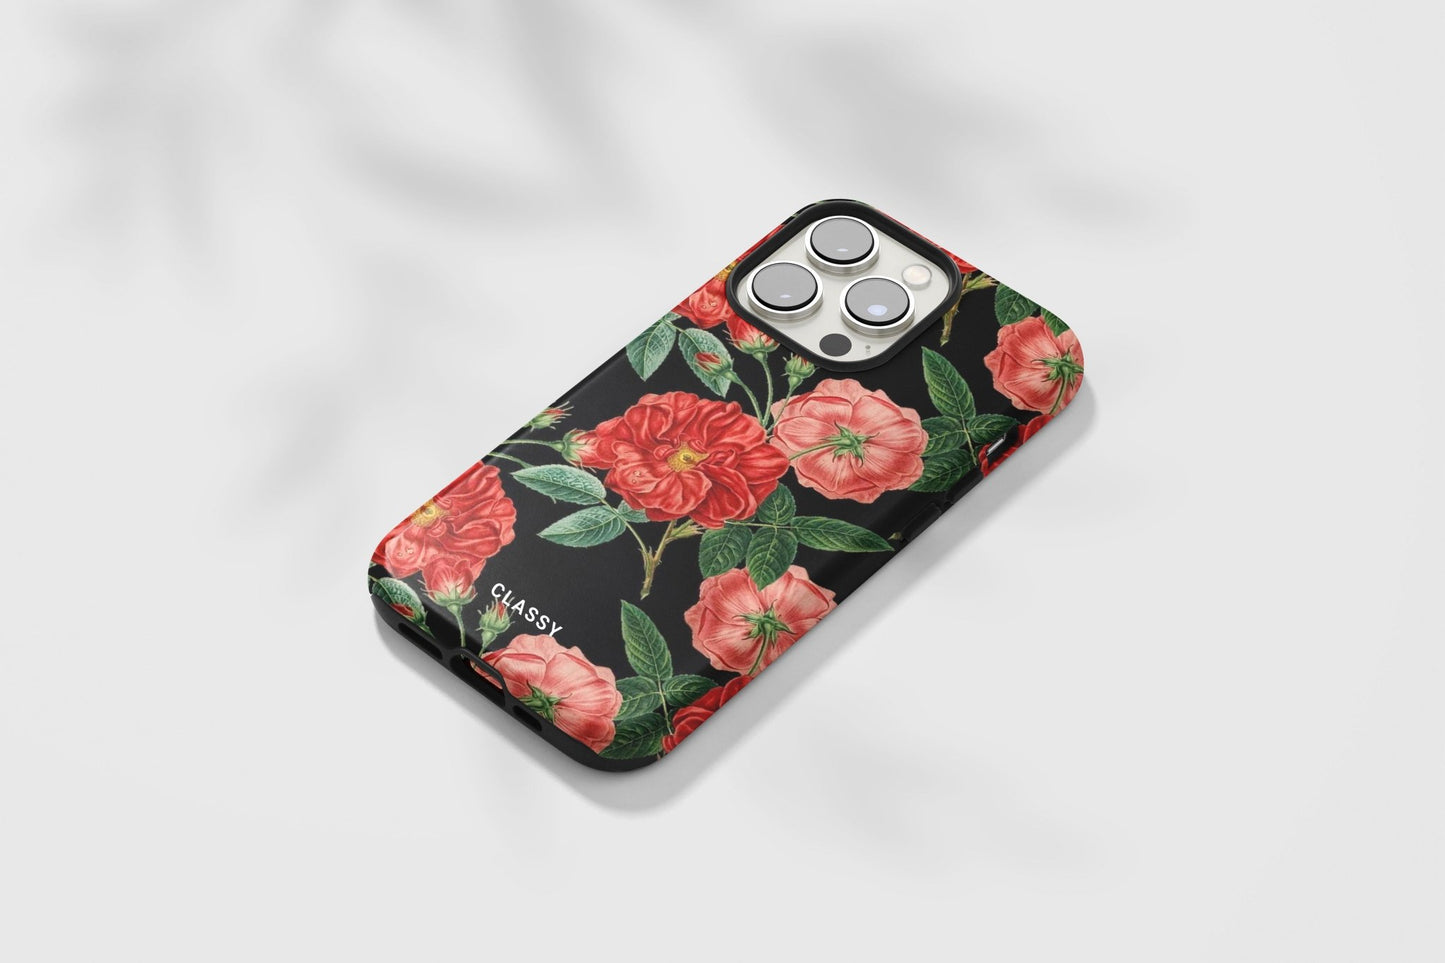 Black Flower Tough Case - Classy Cases - Phone Case - Samsung Galaxy S22 - Glossy -